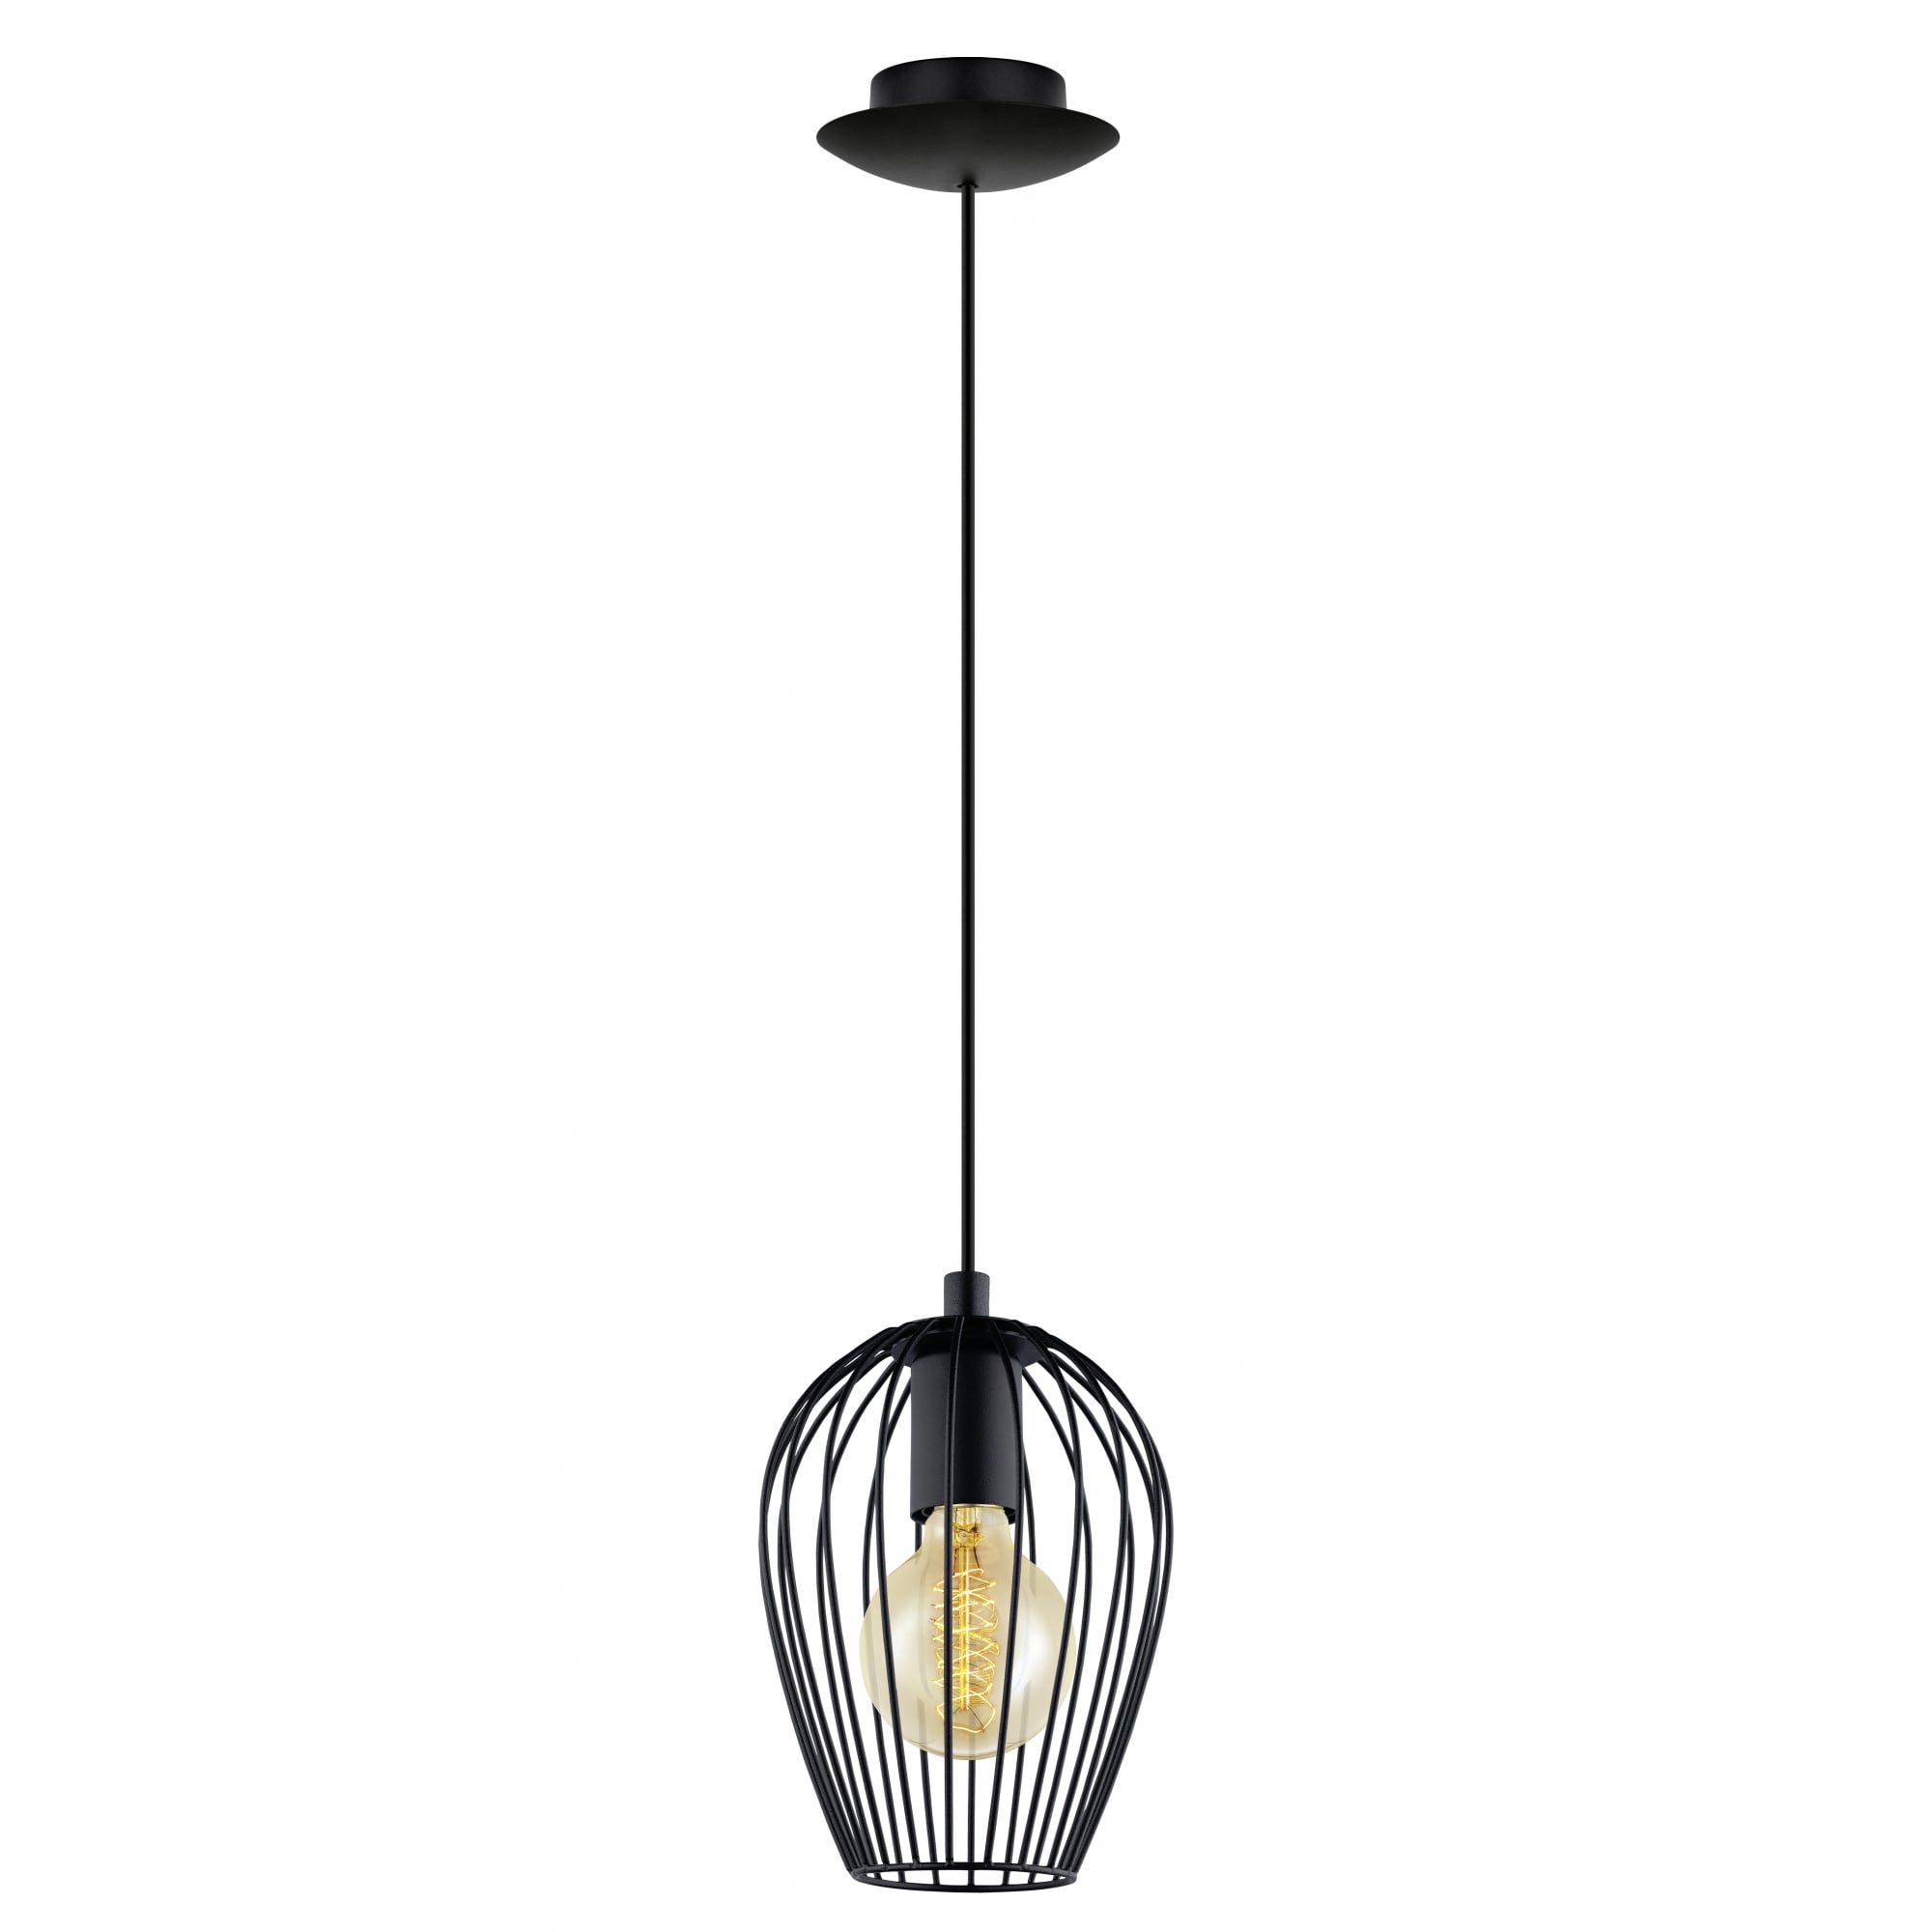 Edgy Newtown Minature Caged Ceiling Pendant